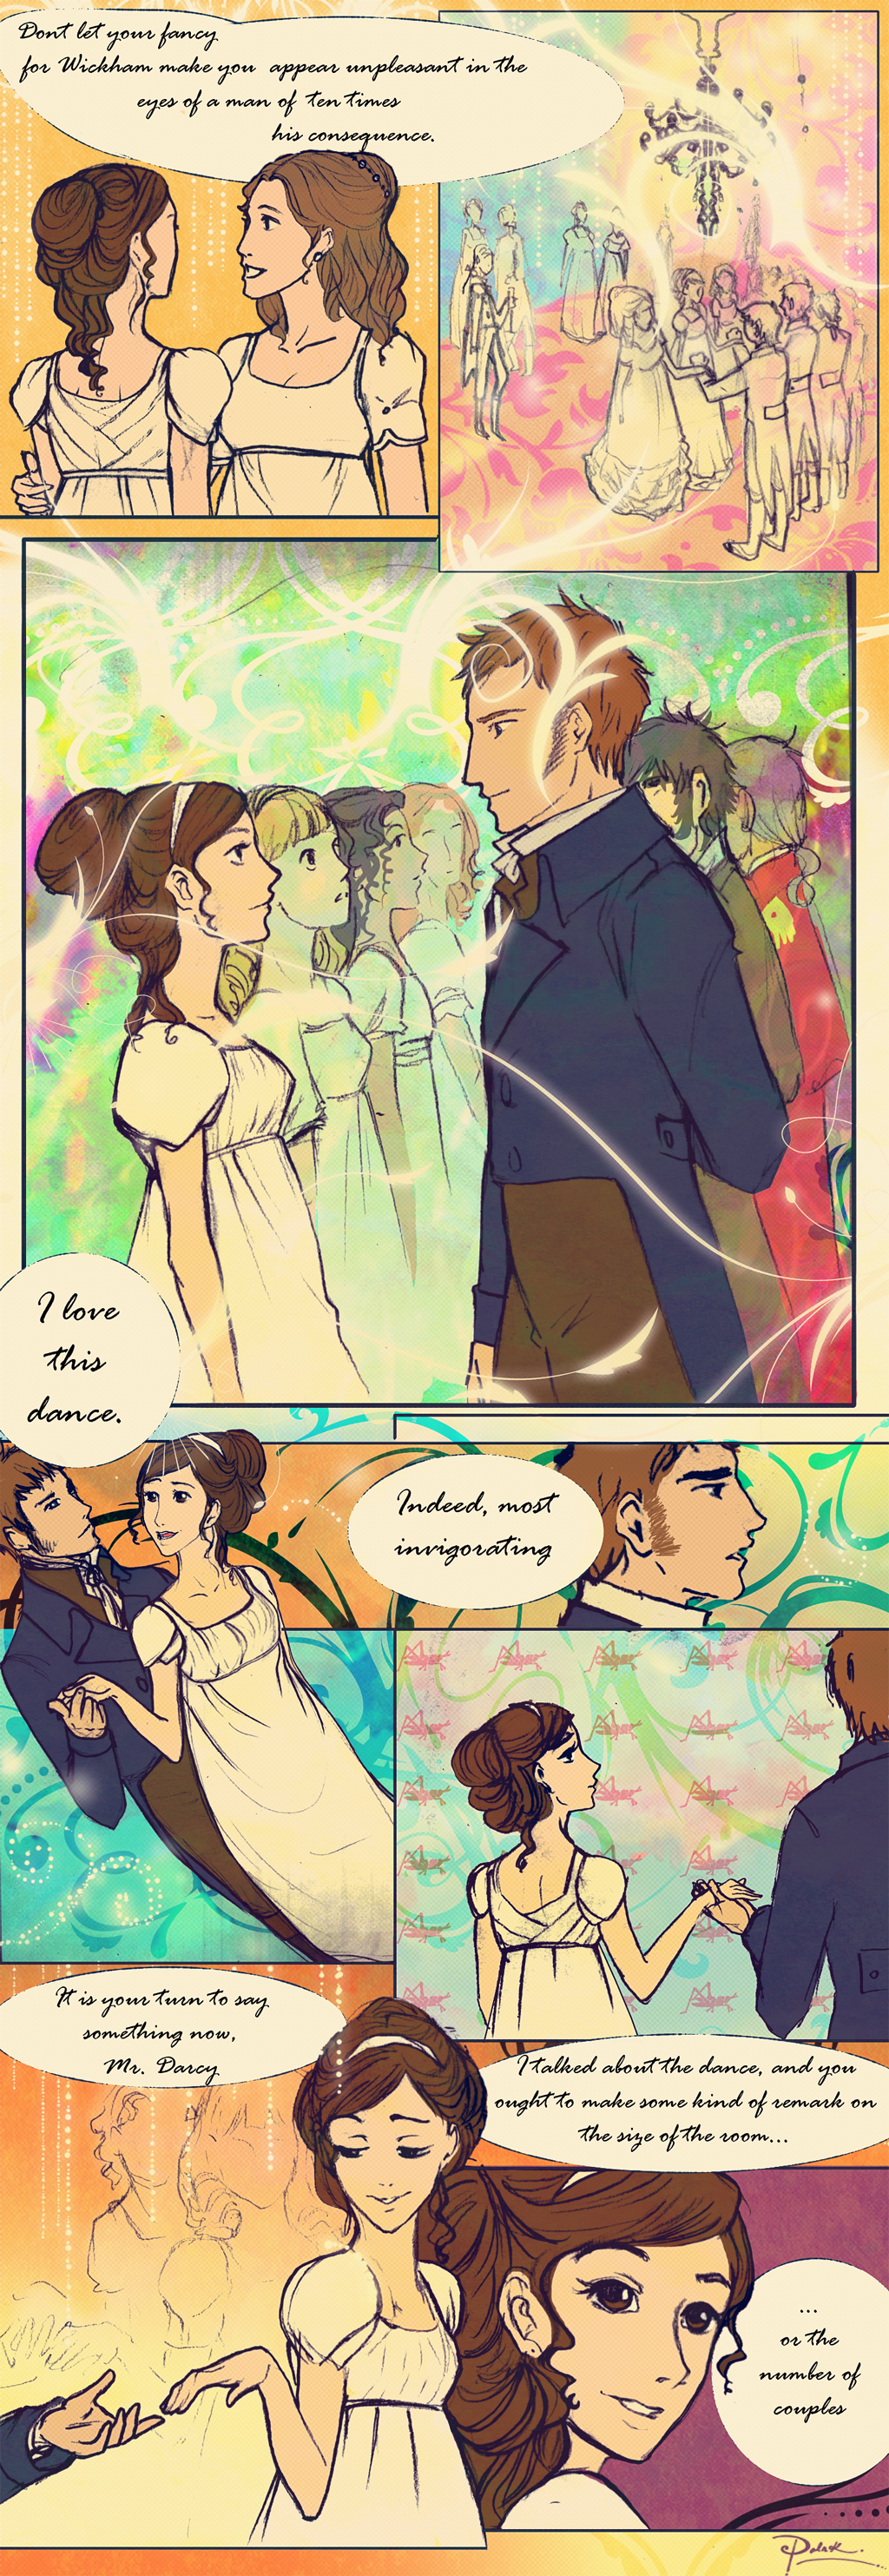 Netherfield ball page 2